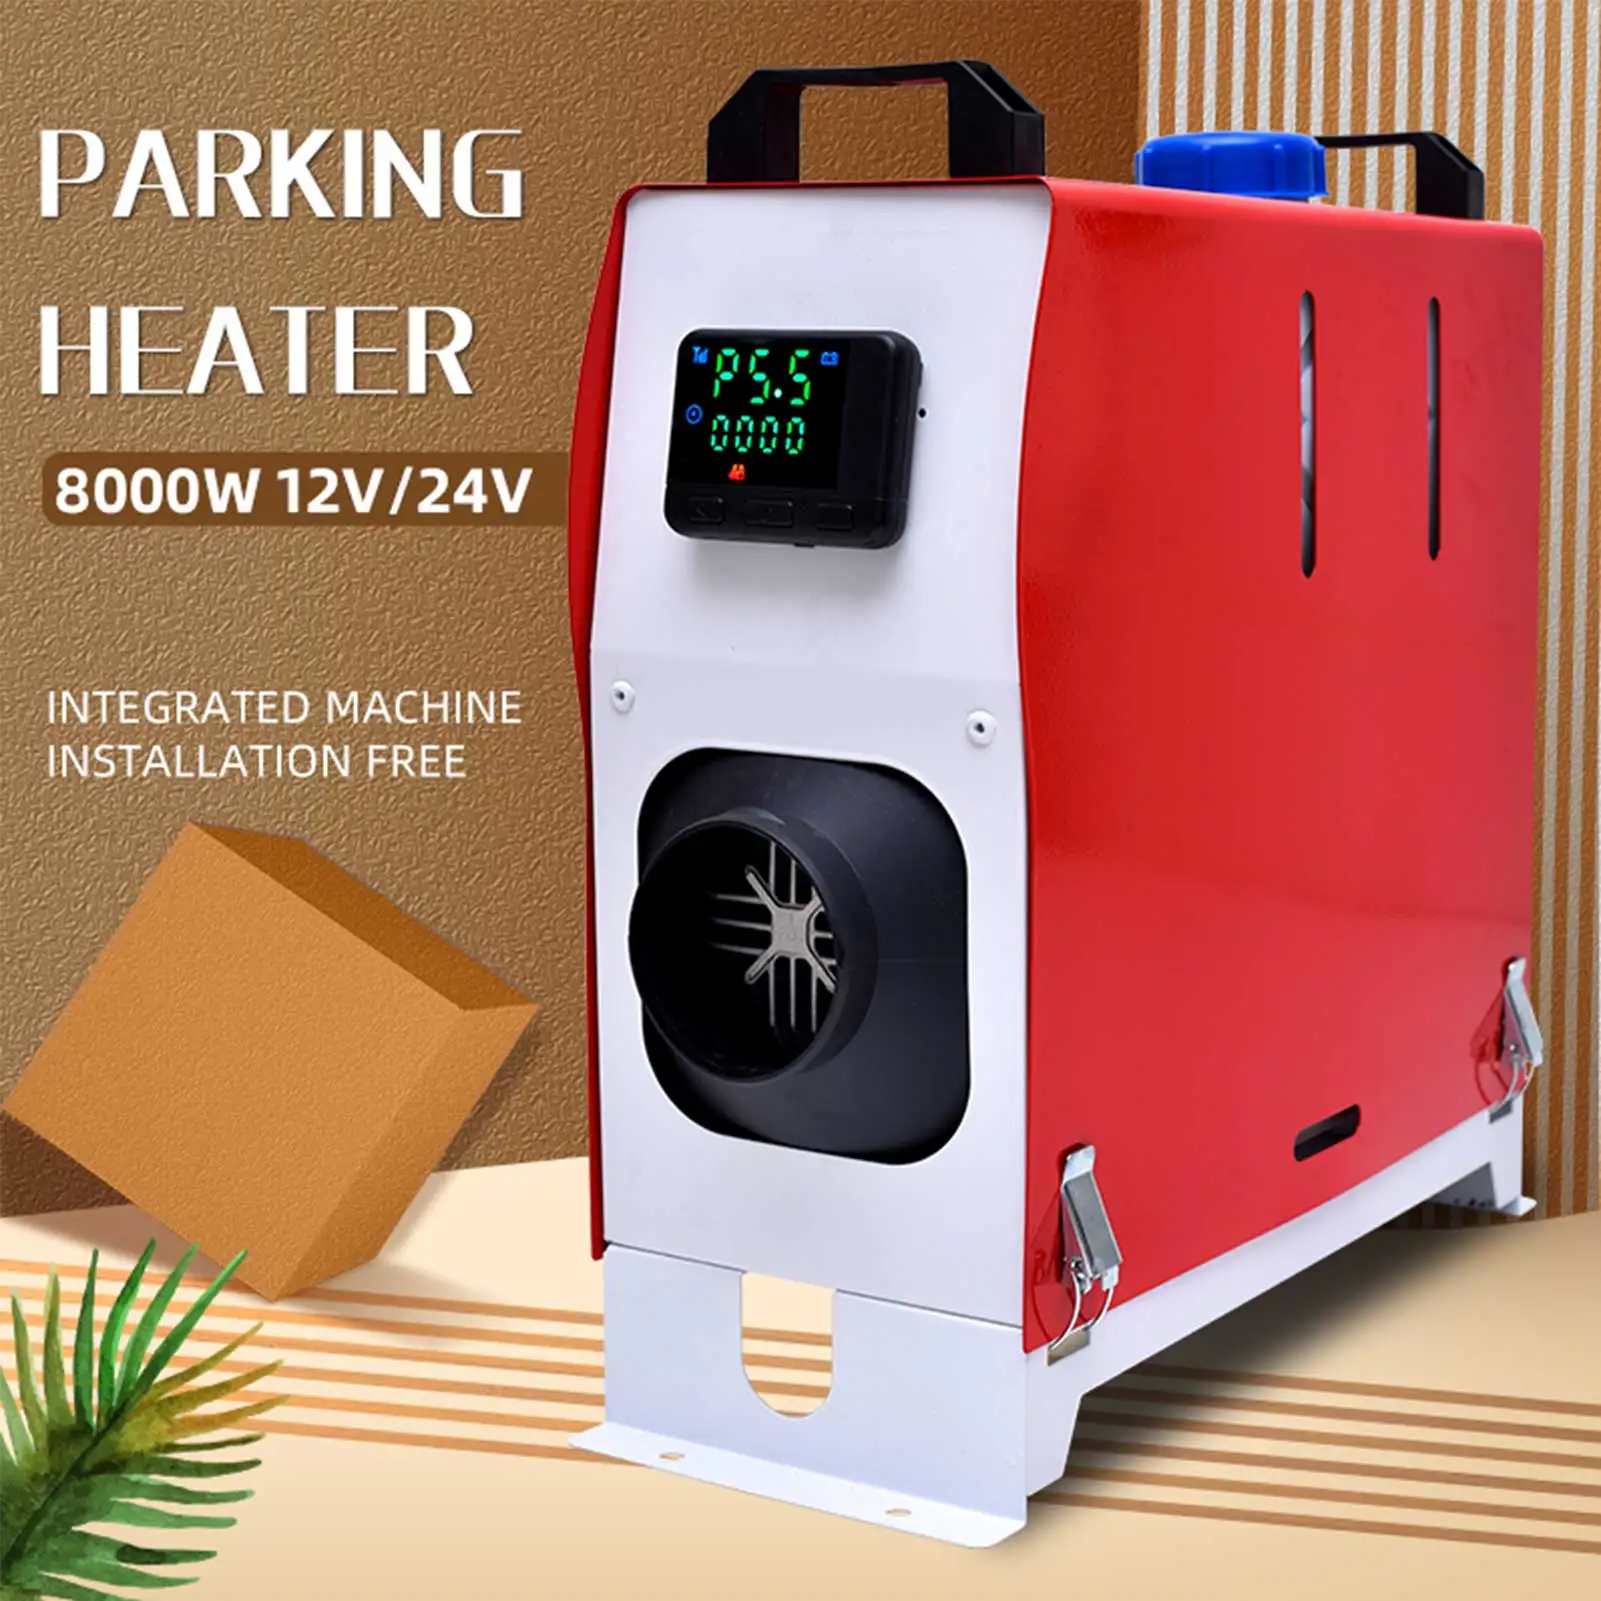 

All In One 12V 8KW Diesel Air Heater Warm Car Parking Heater Air Conditioner Machine Remote Control LCD Display For Truck Boat N